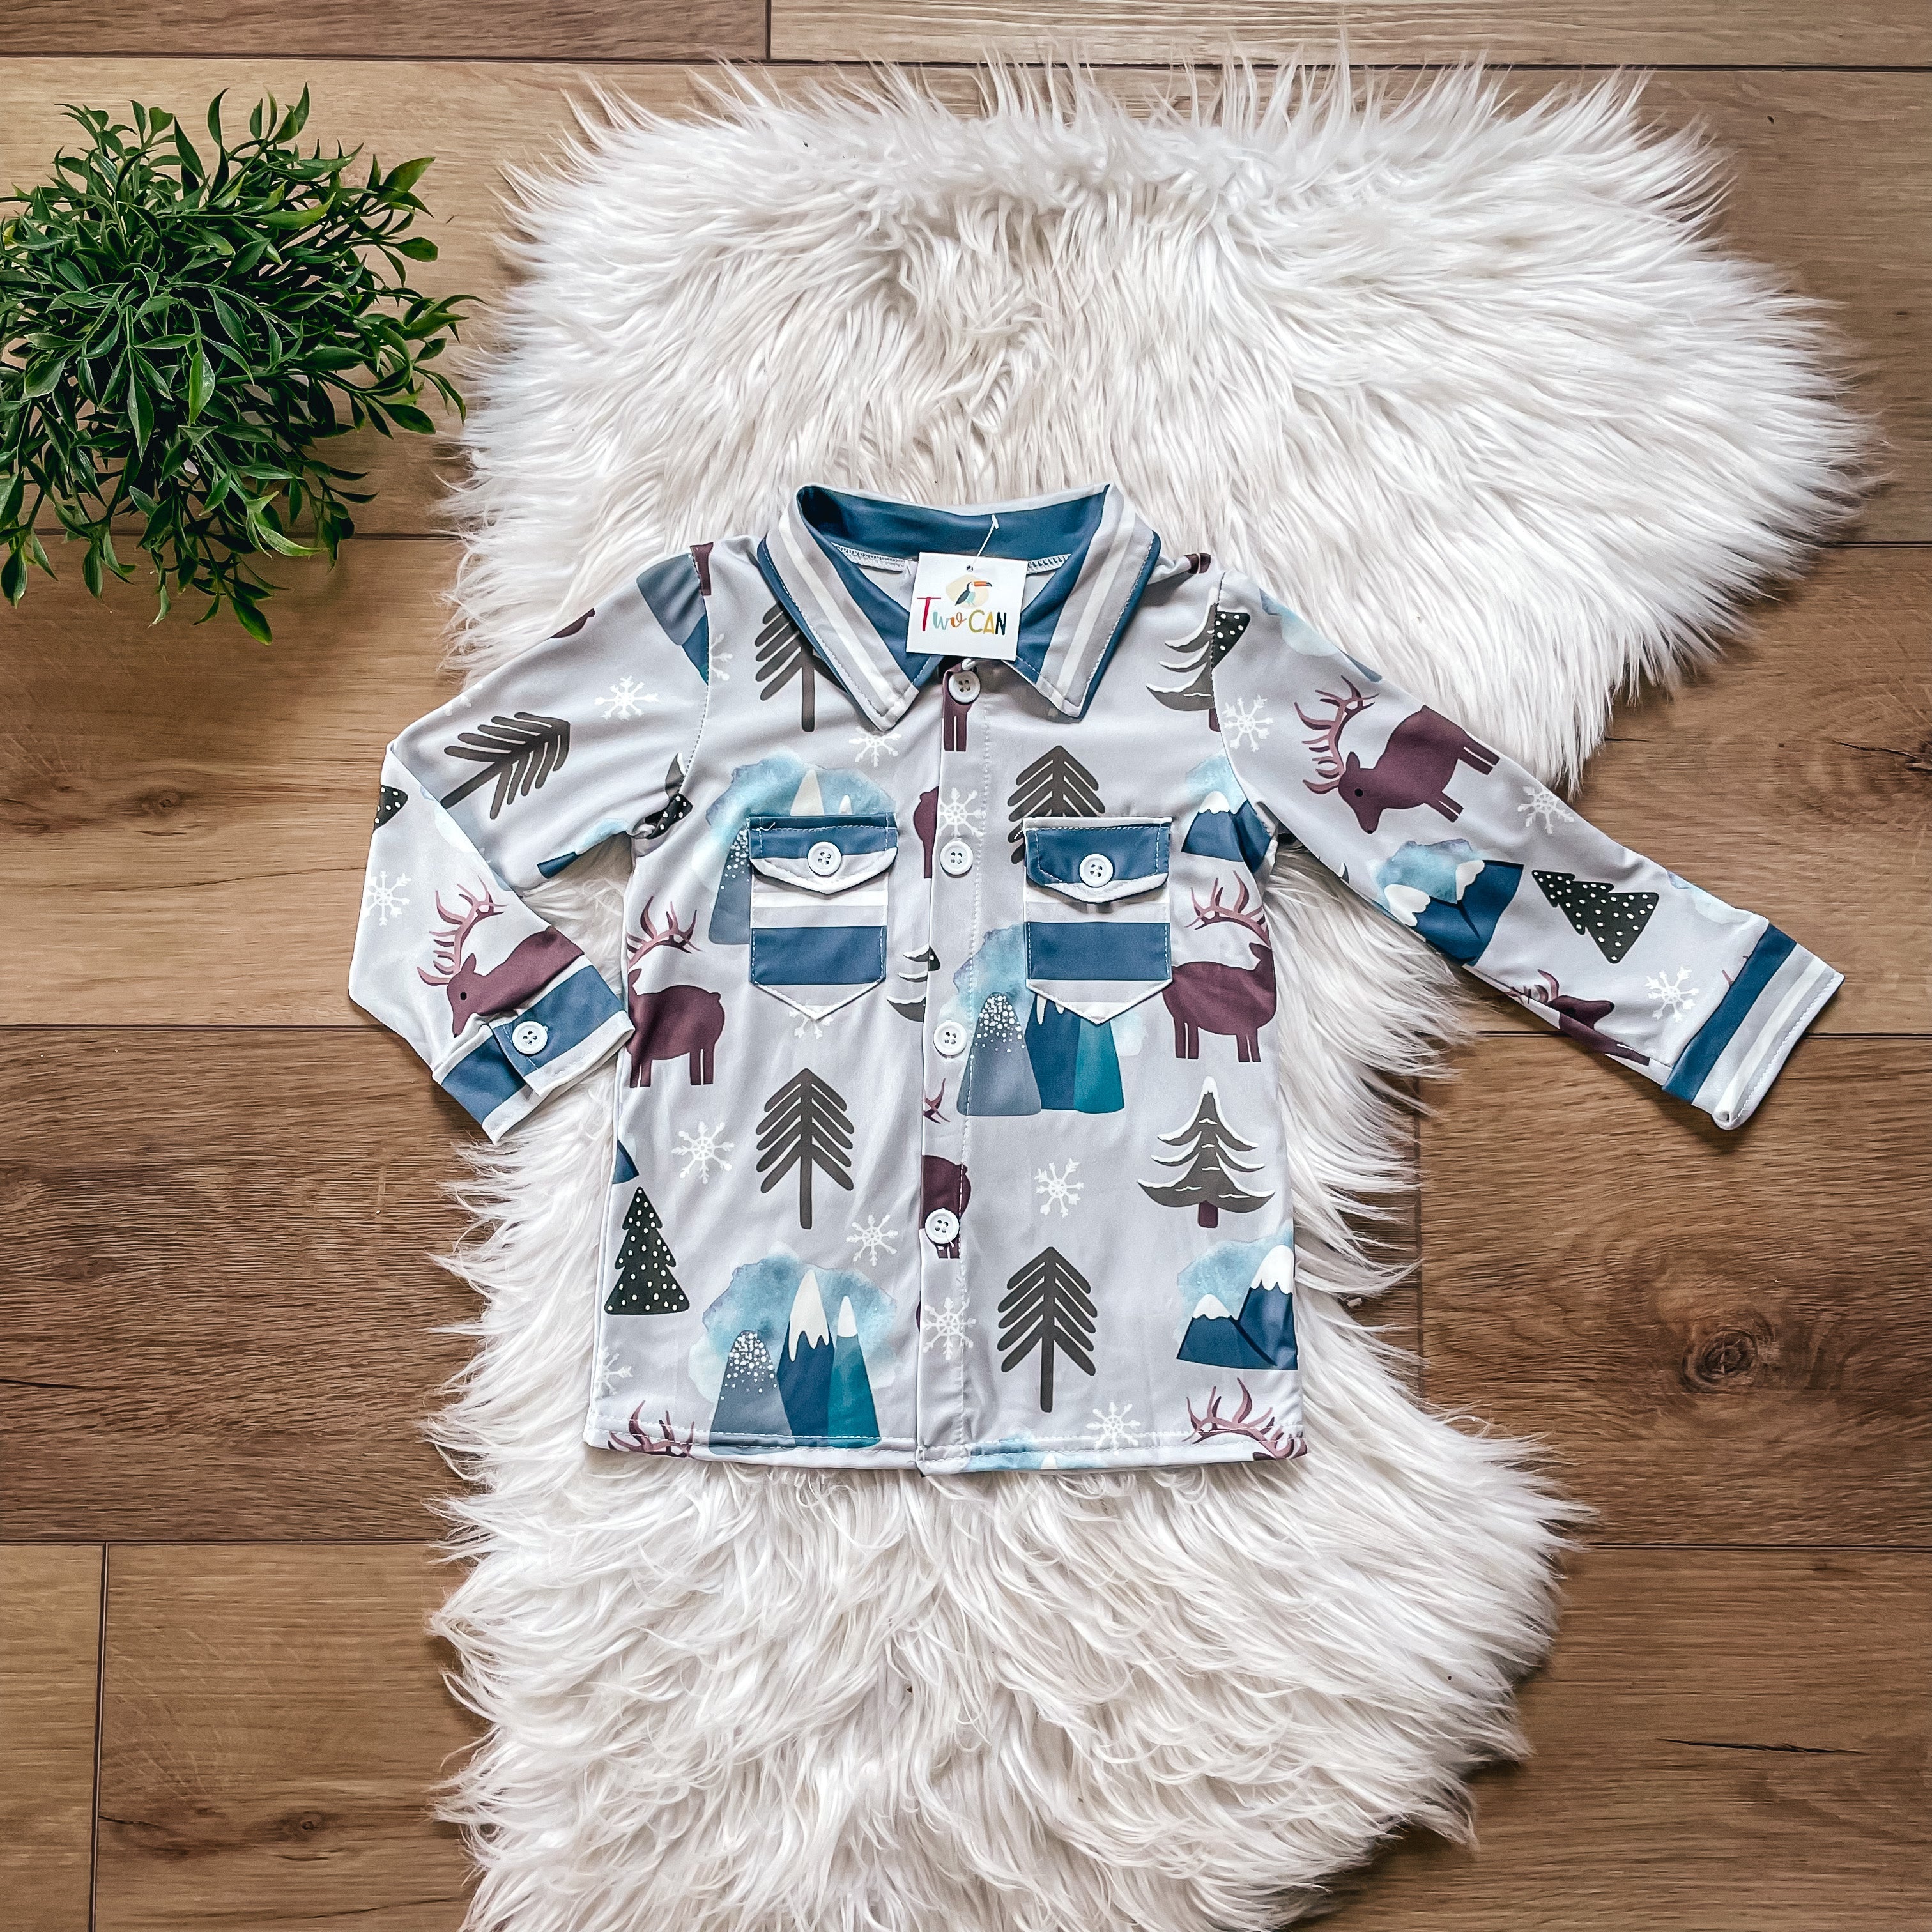 Winter Scene Long Sleeve Button Up Tee Shirt by Twocan